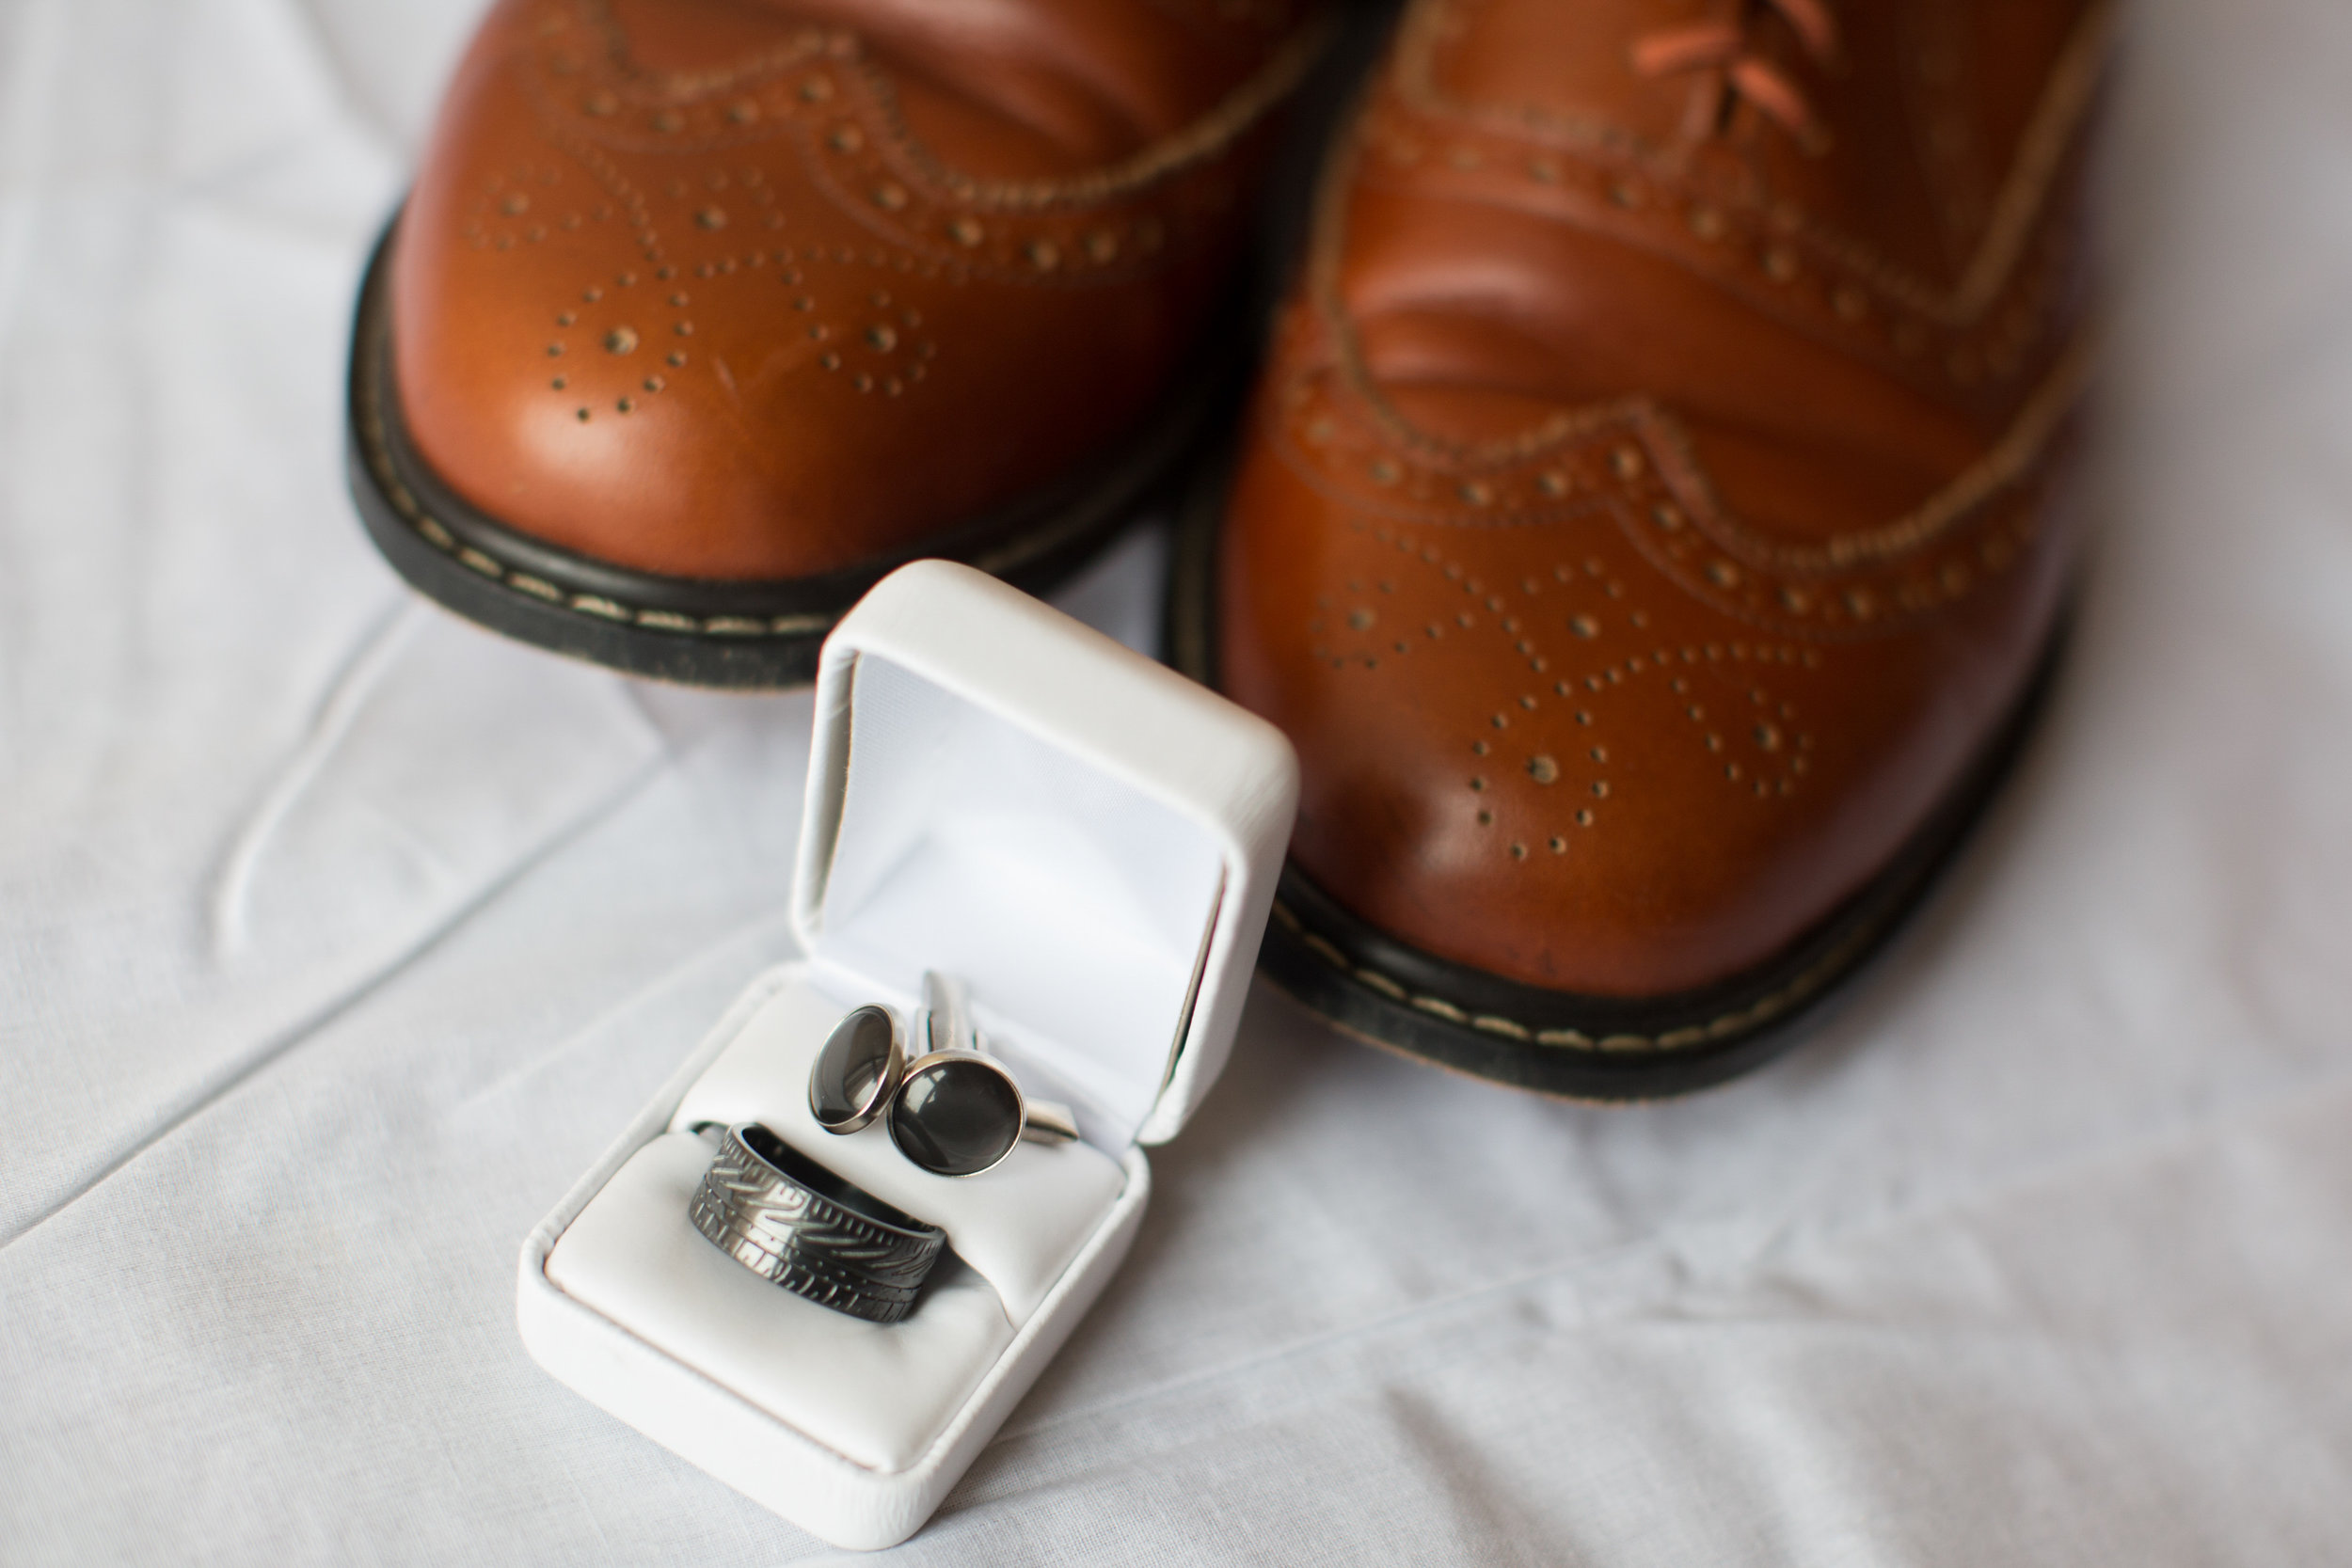  groom-details-ring-and-shoes 